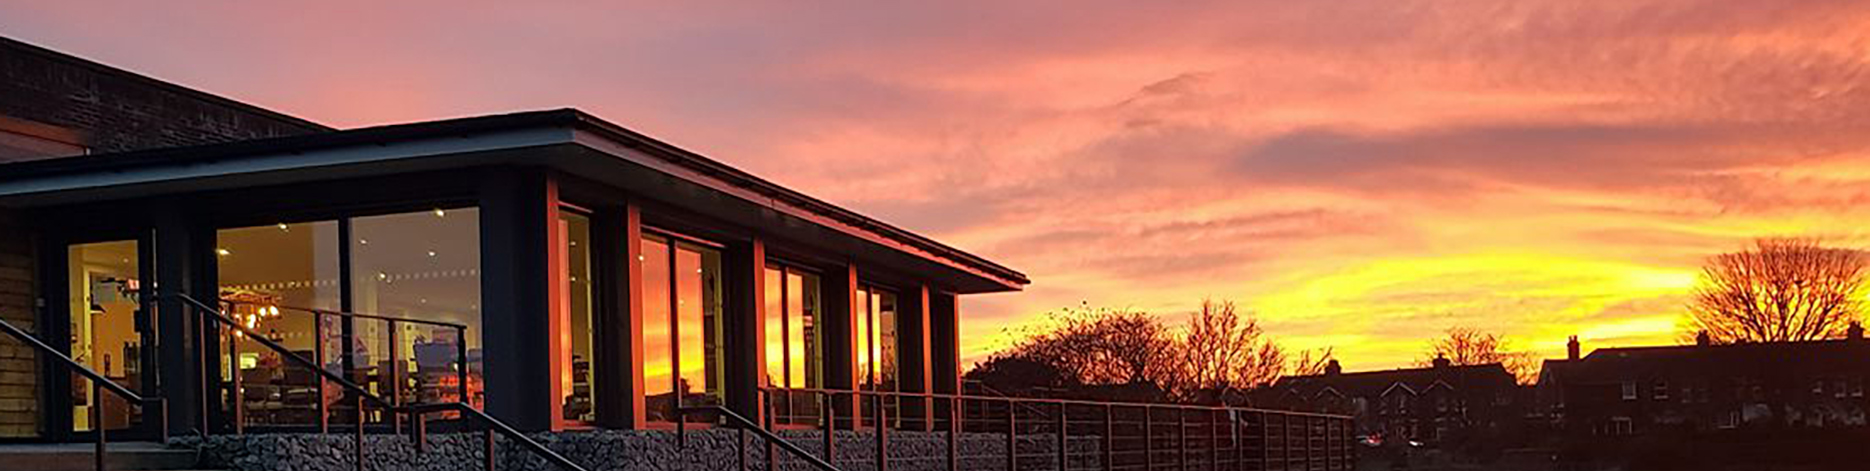 Vibrant sunset reflecting off the building at Perch in Princes Park events